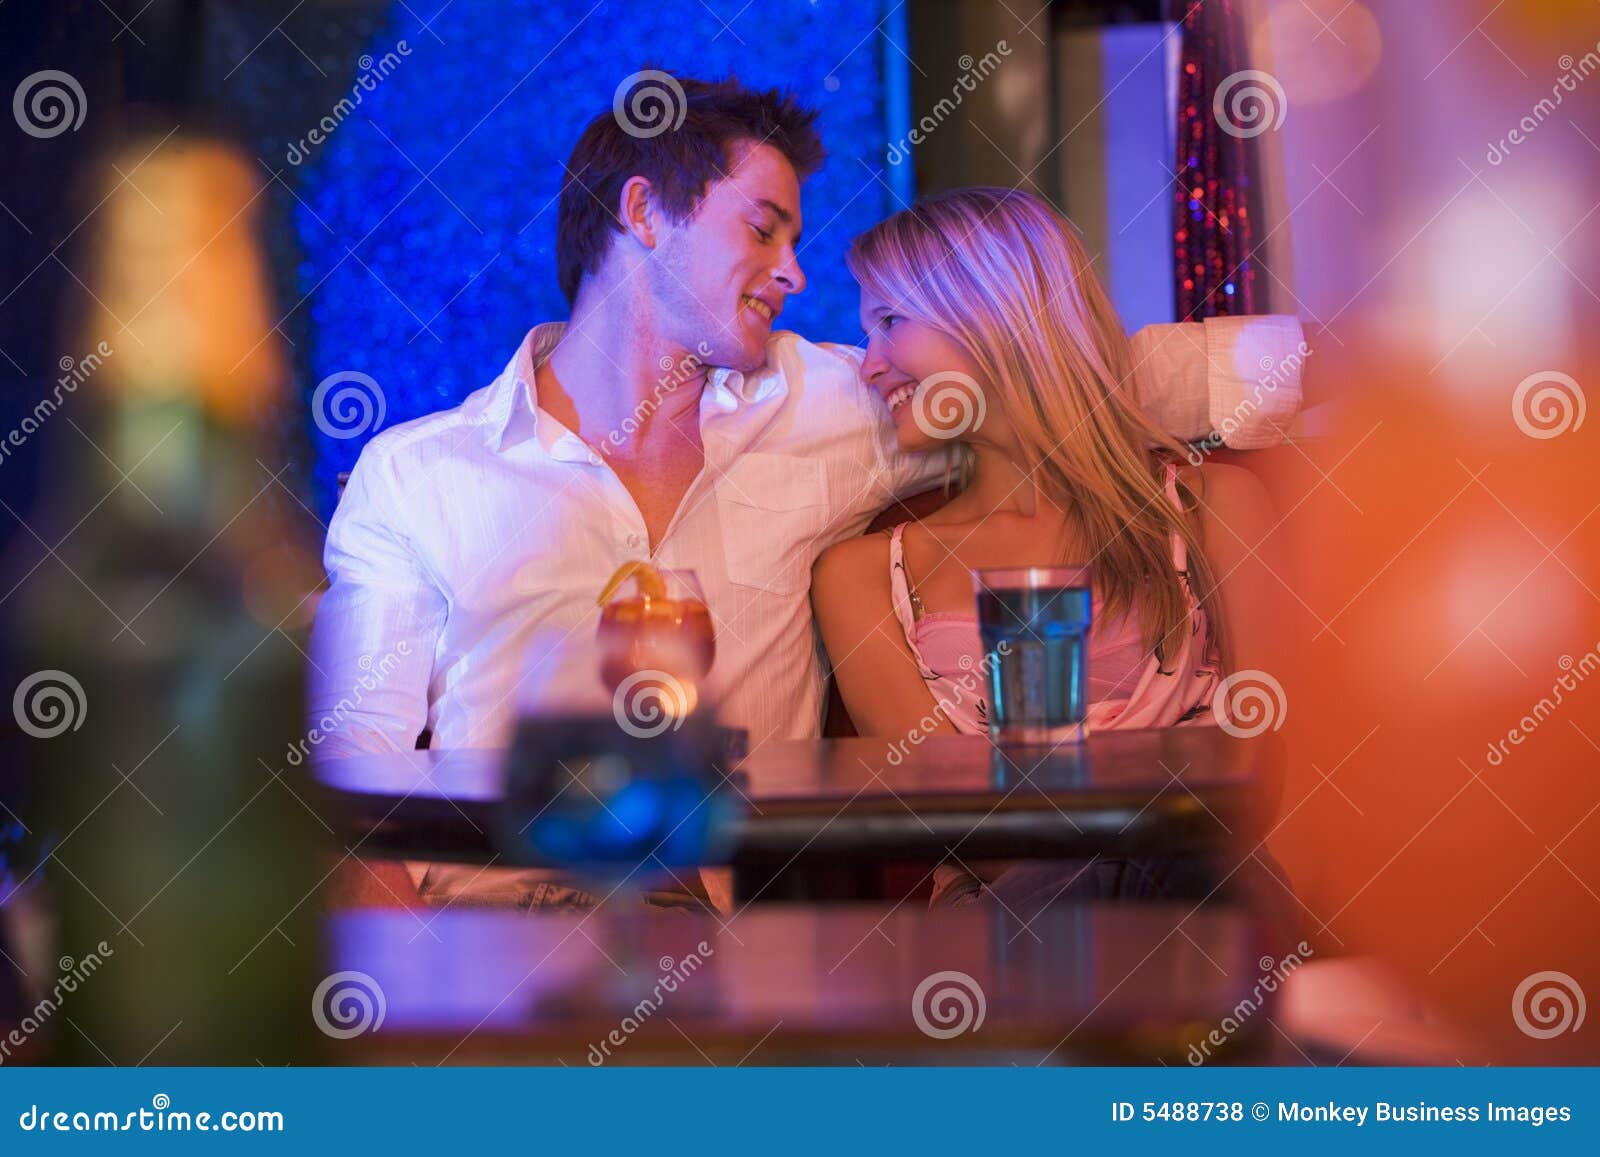 https://thumbs.dreamstime.com/z/happy-young-couple-sitting-nightclub-smiling-5488738.jpg